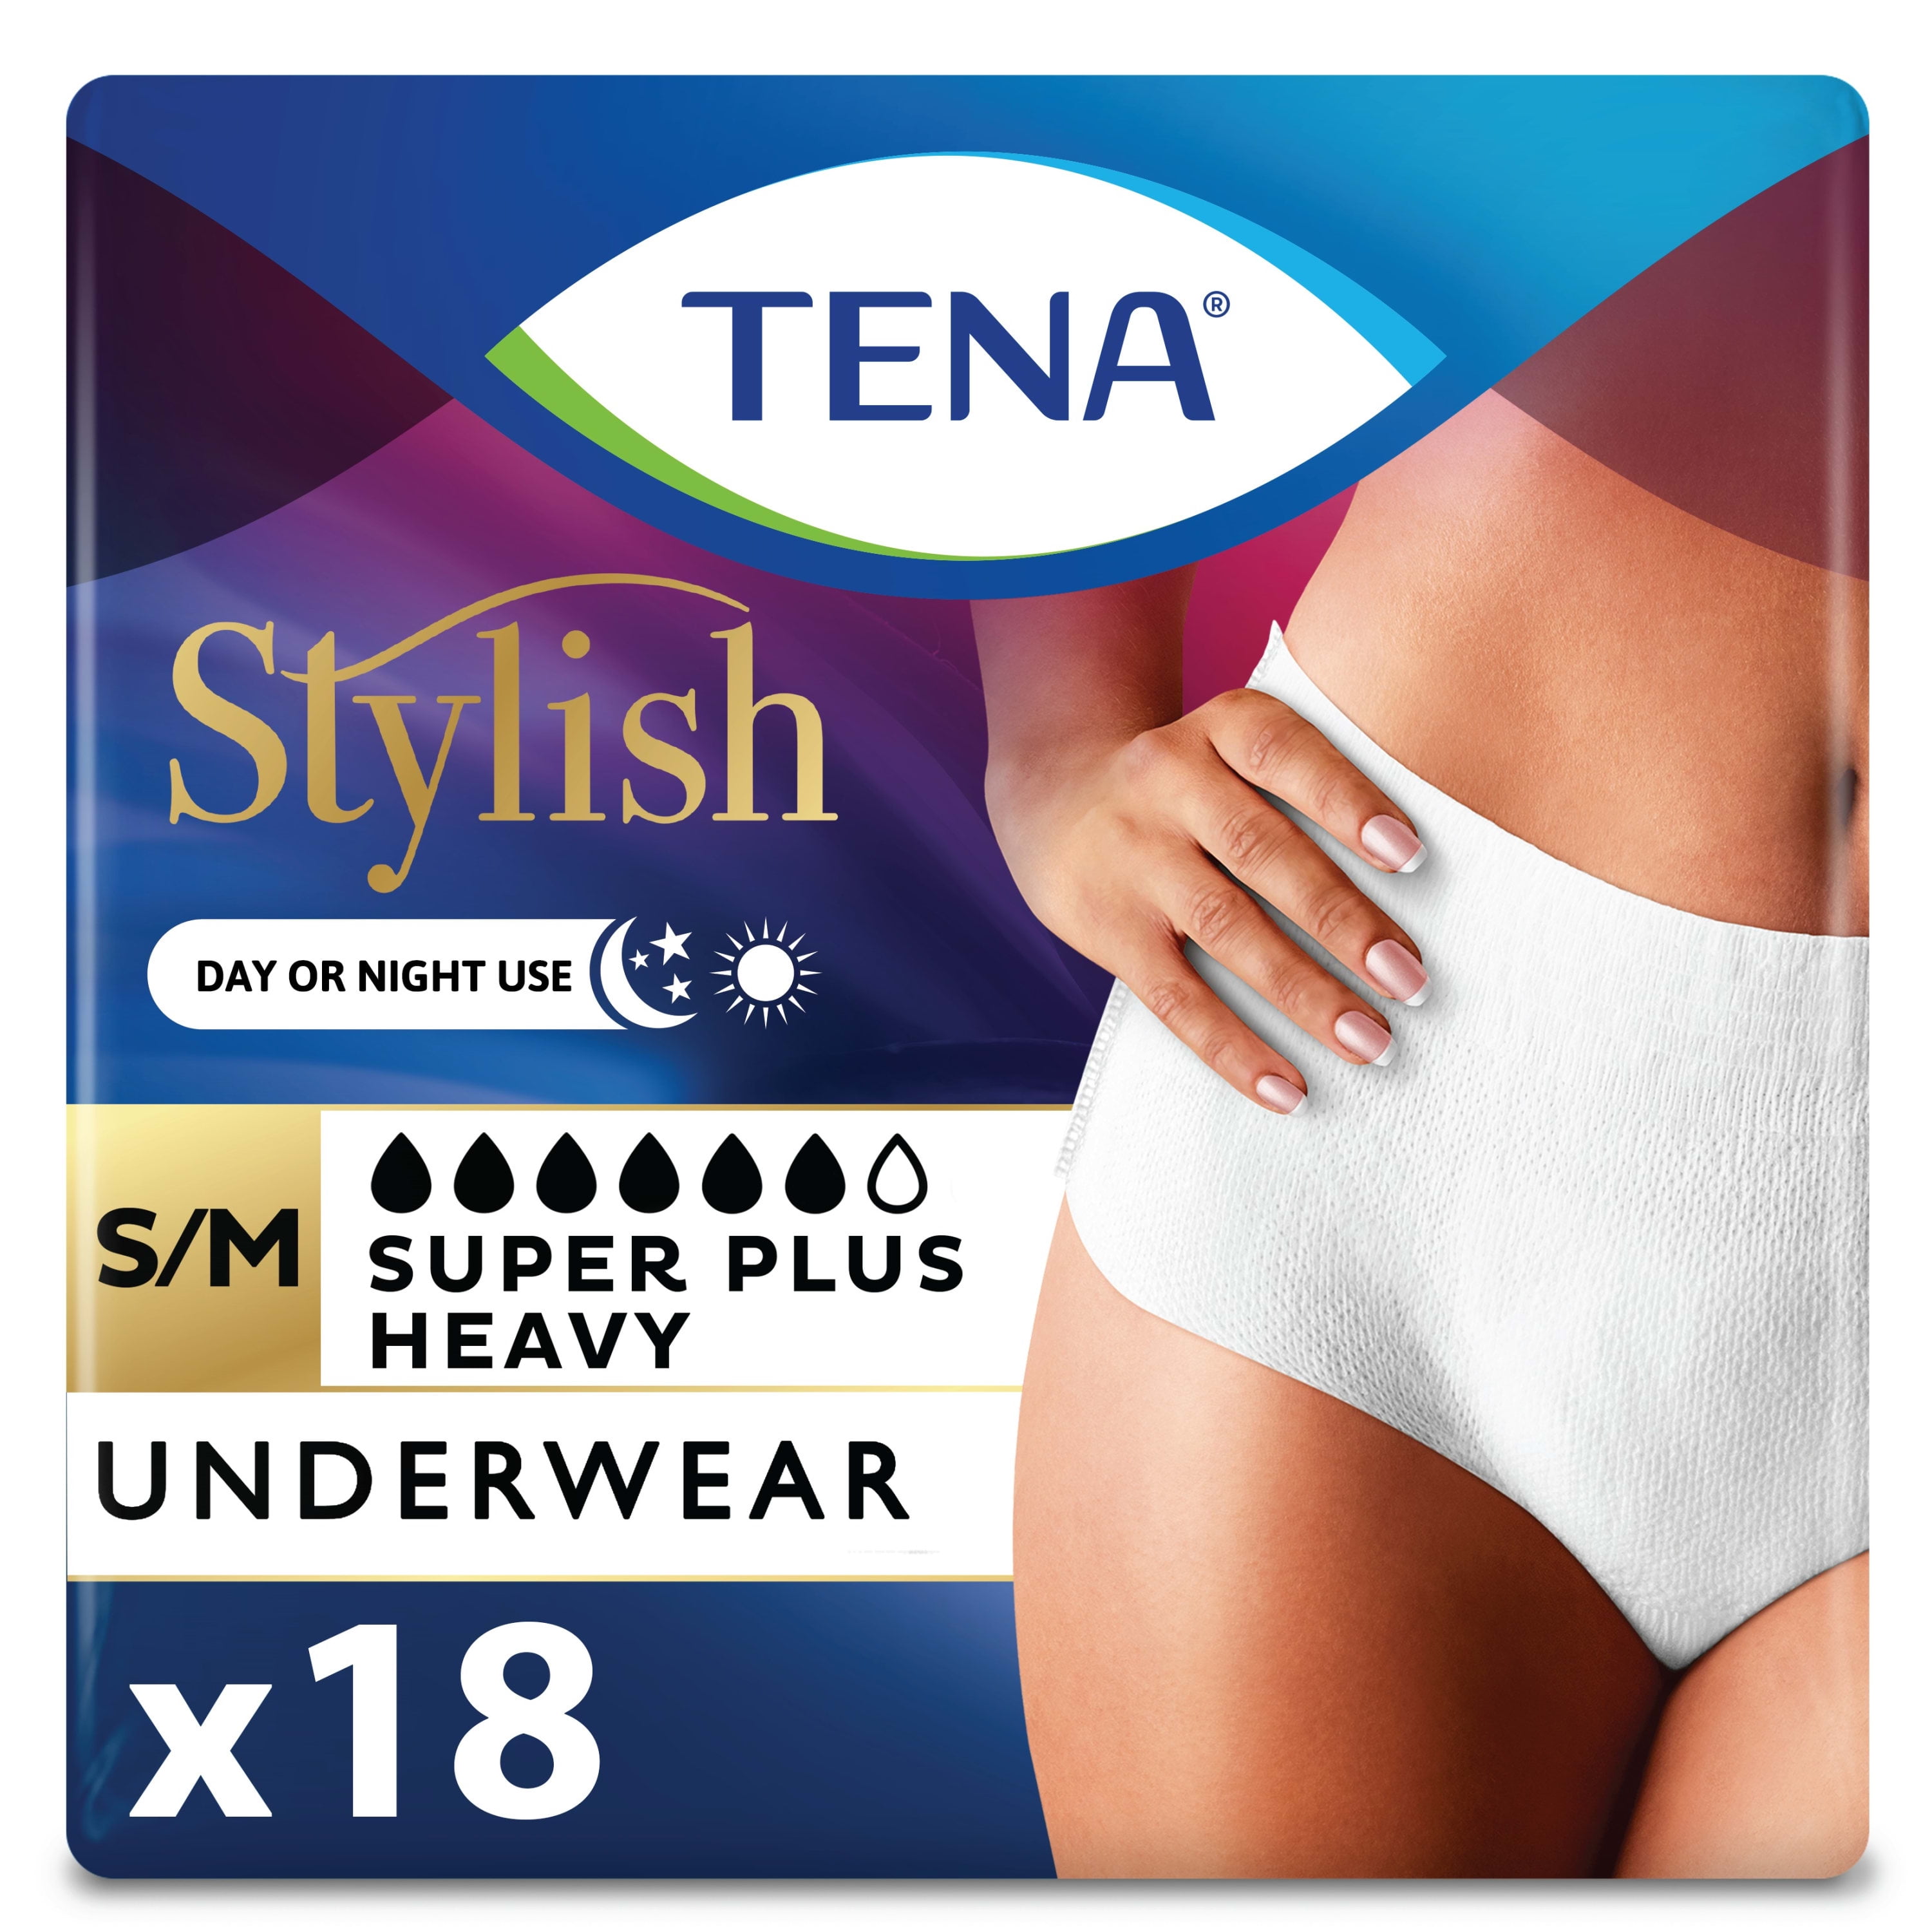 7 Incontinence Underwear and Pads to Try